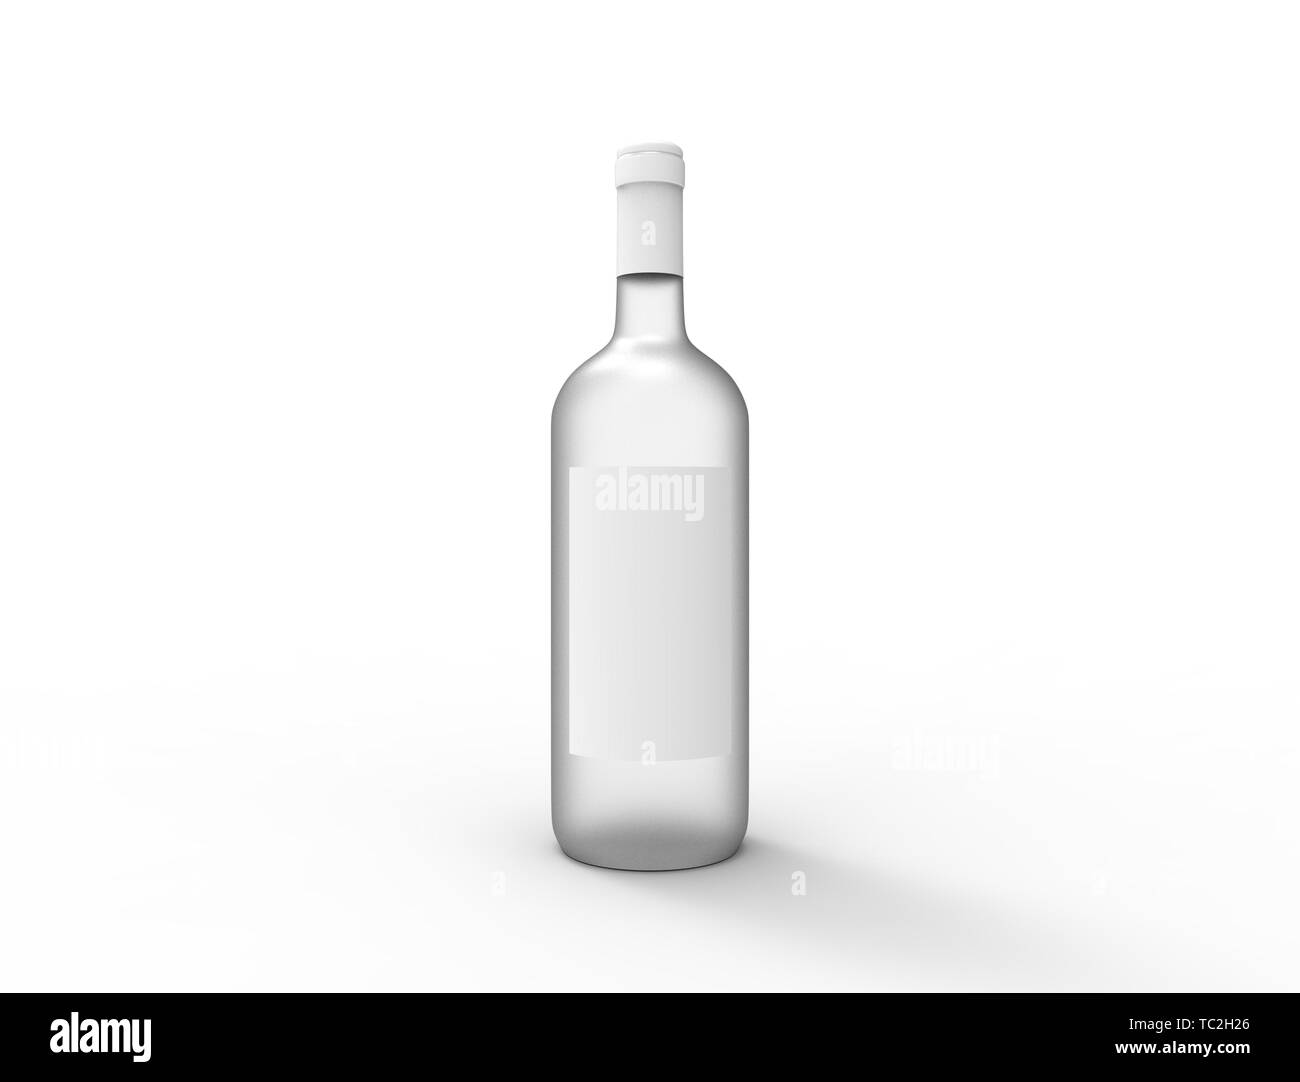 3D rendering of a glass bottle isolated on white background. Stock Photo